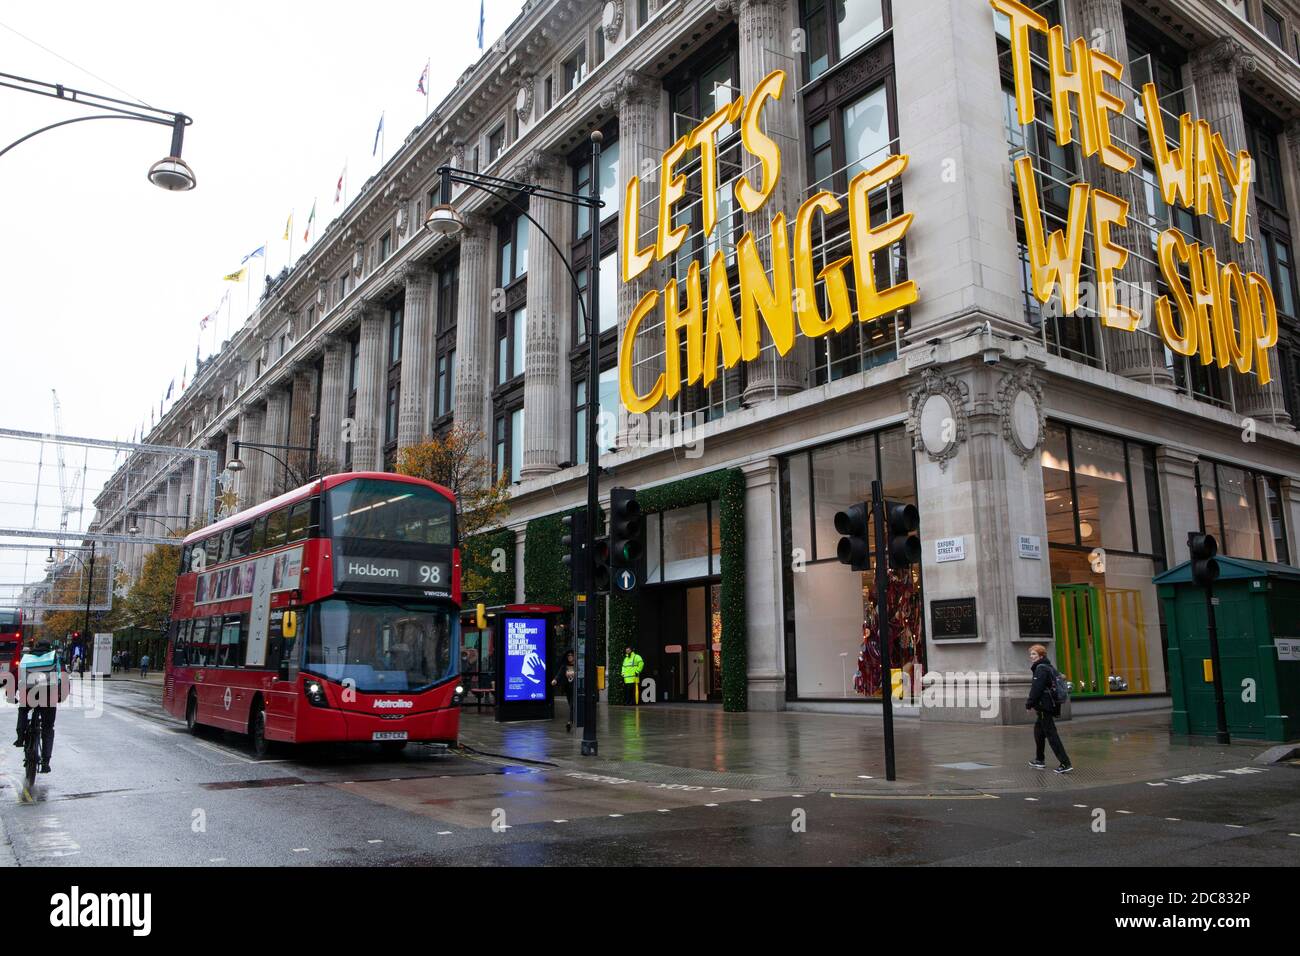 London, UK, 19 November 2020: Despite England's lockdown and rainy weather  some people go window-shopping in London's West End. When Selfridges used  the slogan 'Let's Change The Way We Shop' this is